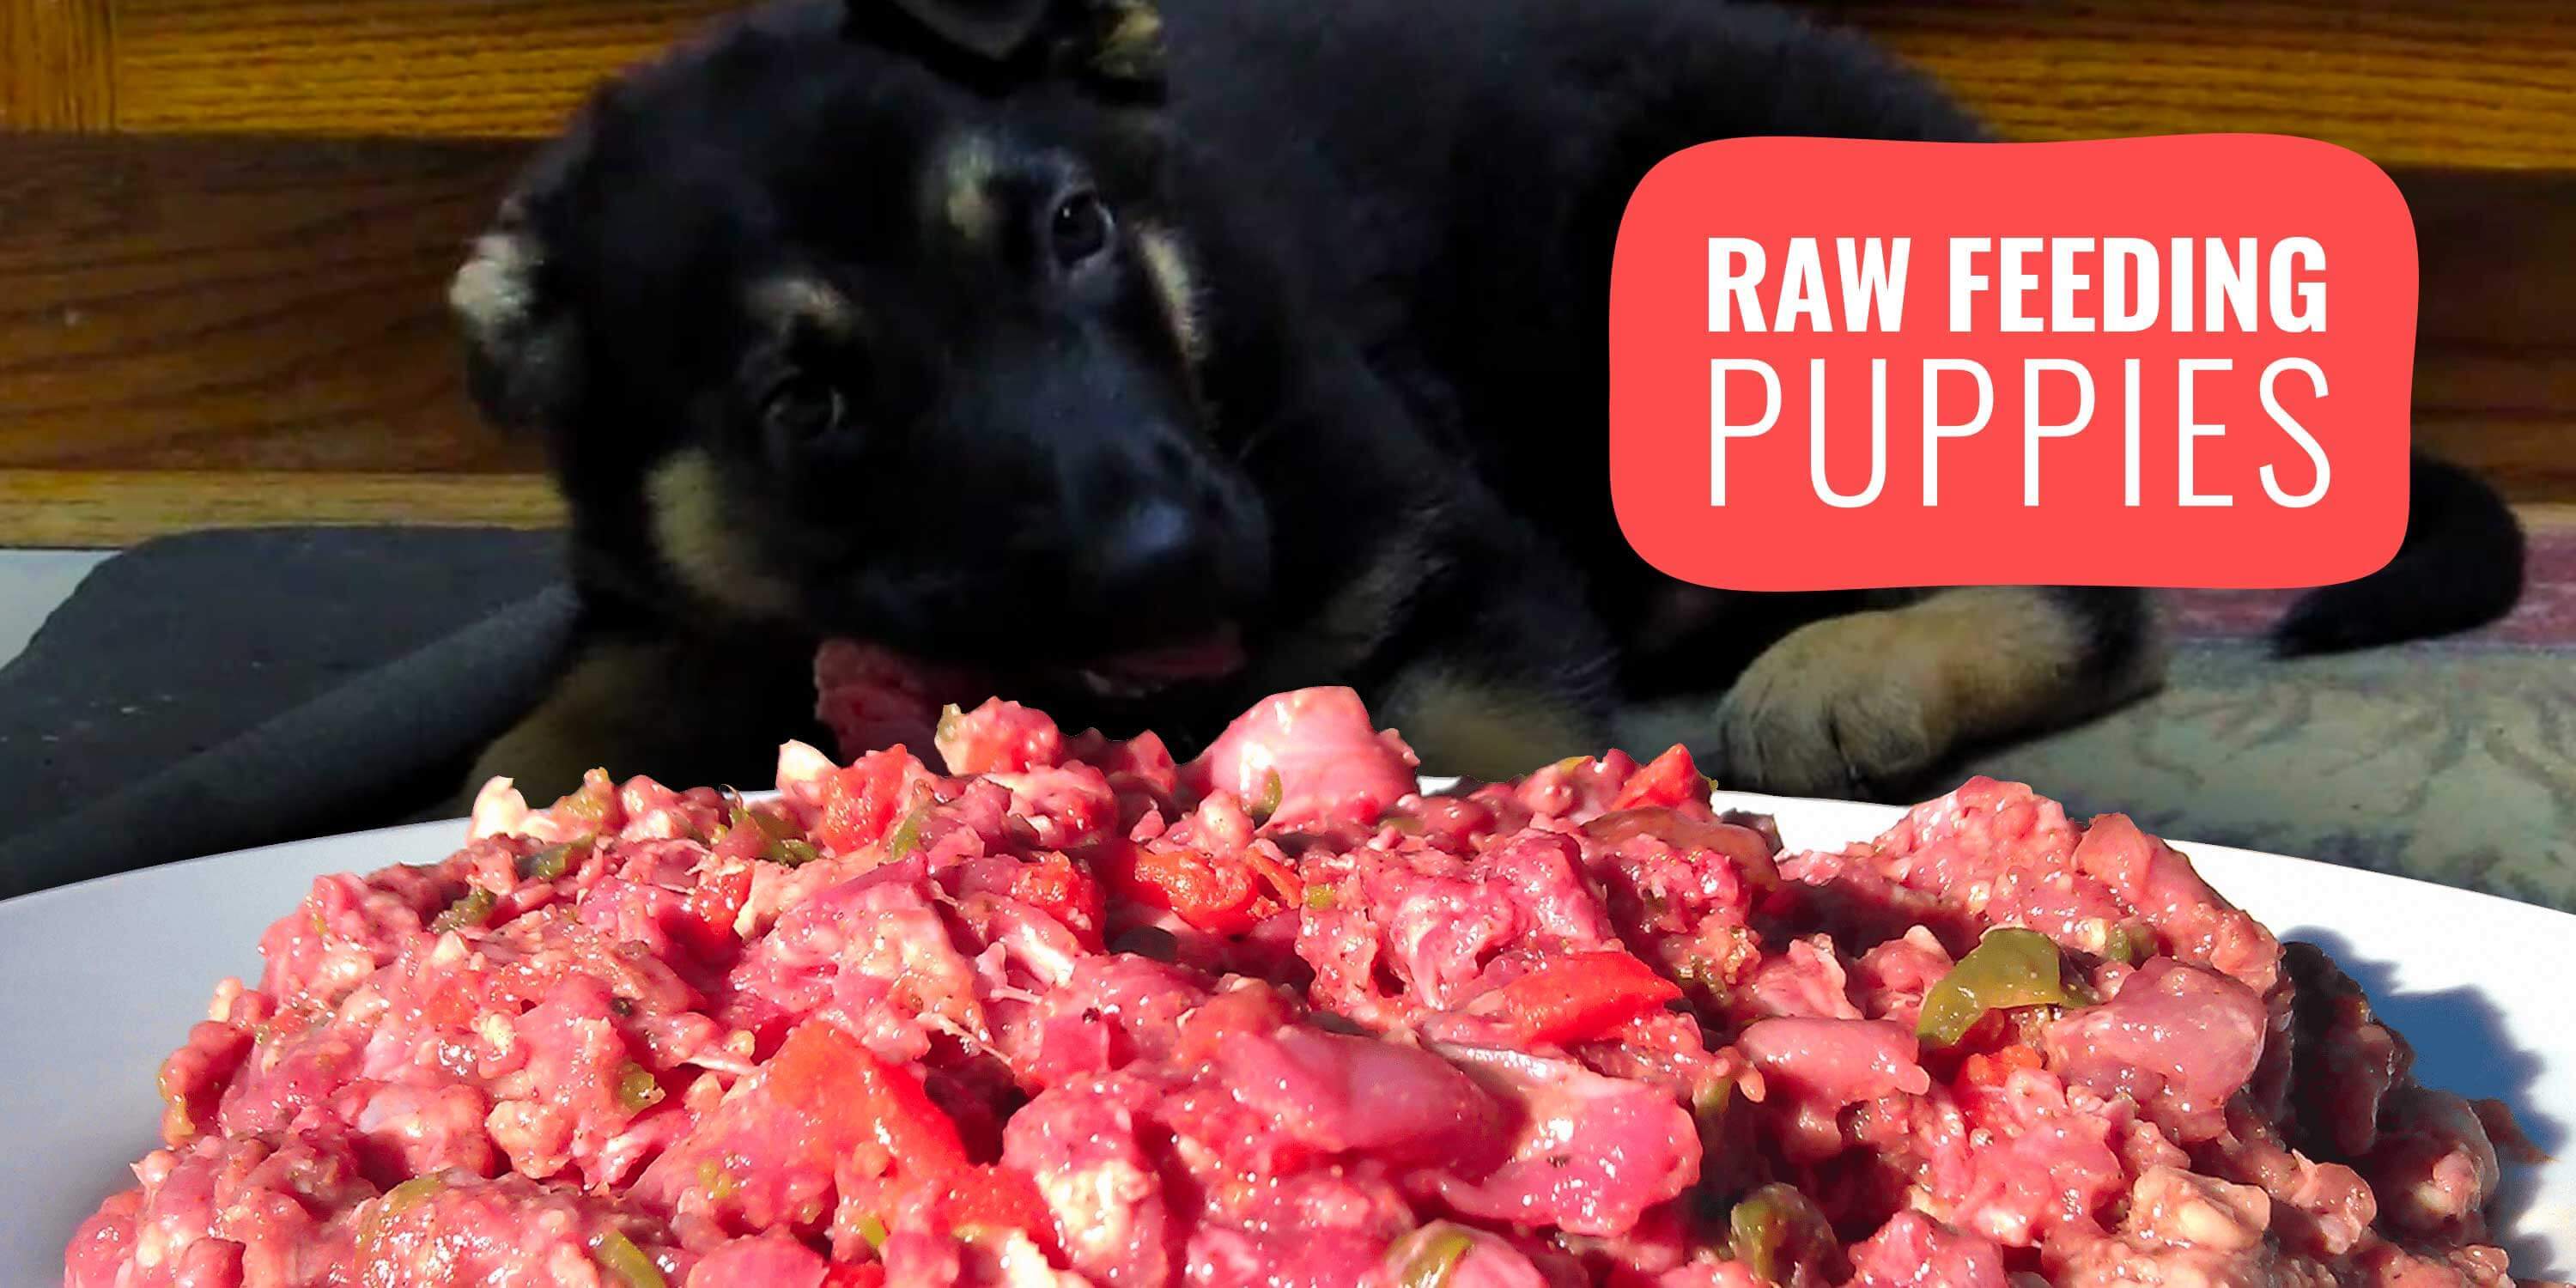 Raw Feeding Puppies How To, Guide, Risks, Benefits & FAQ